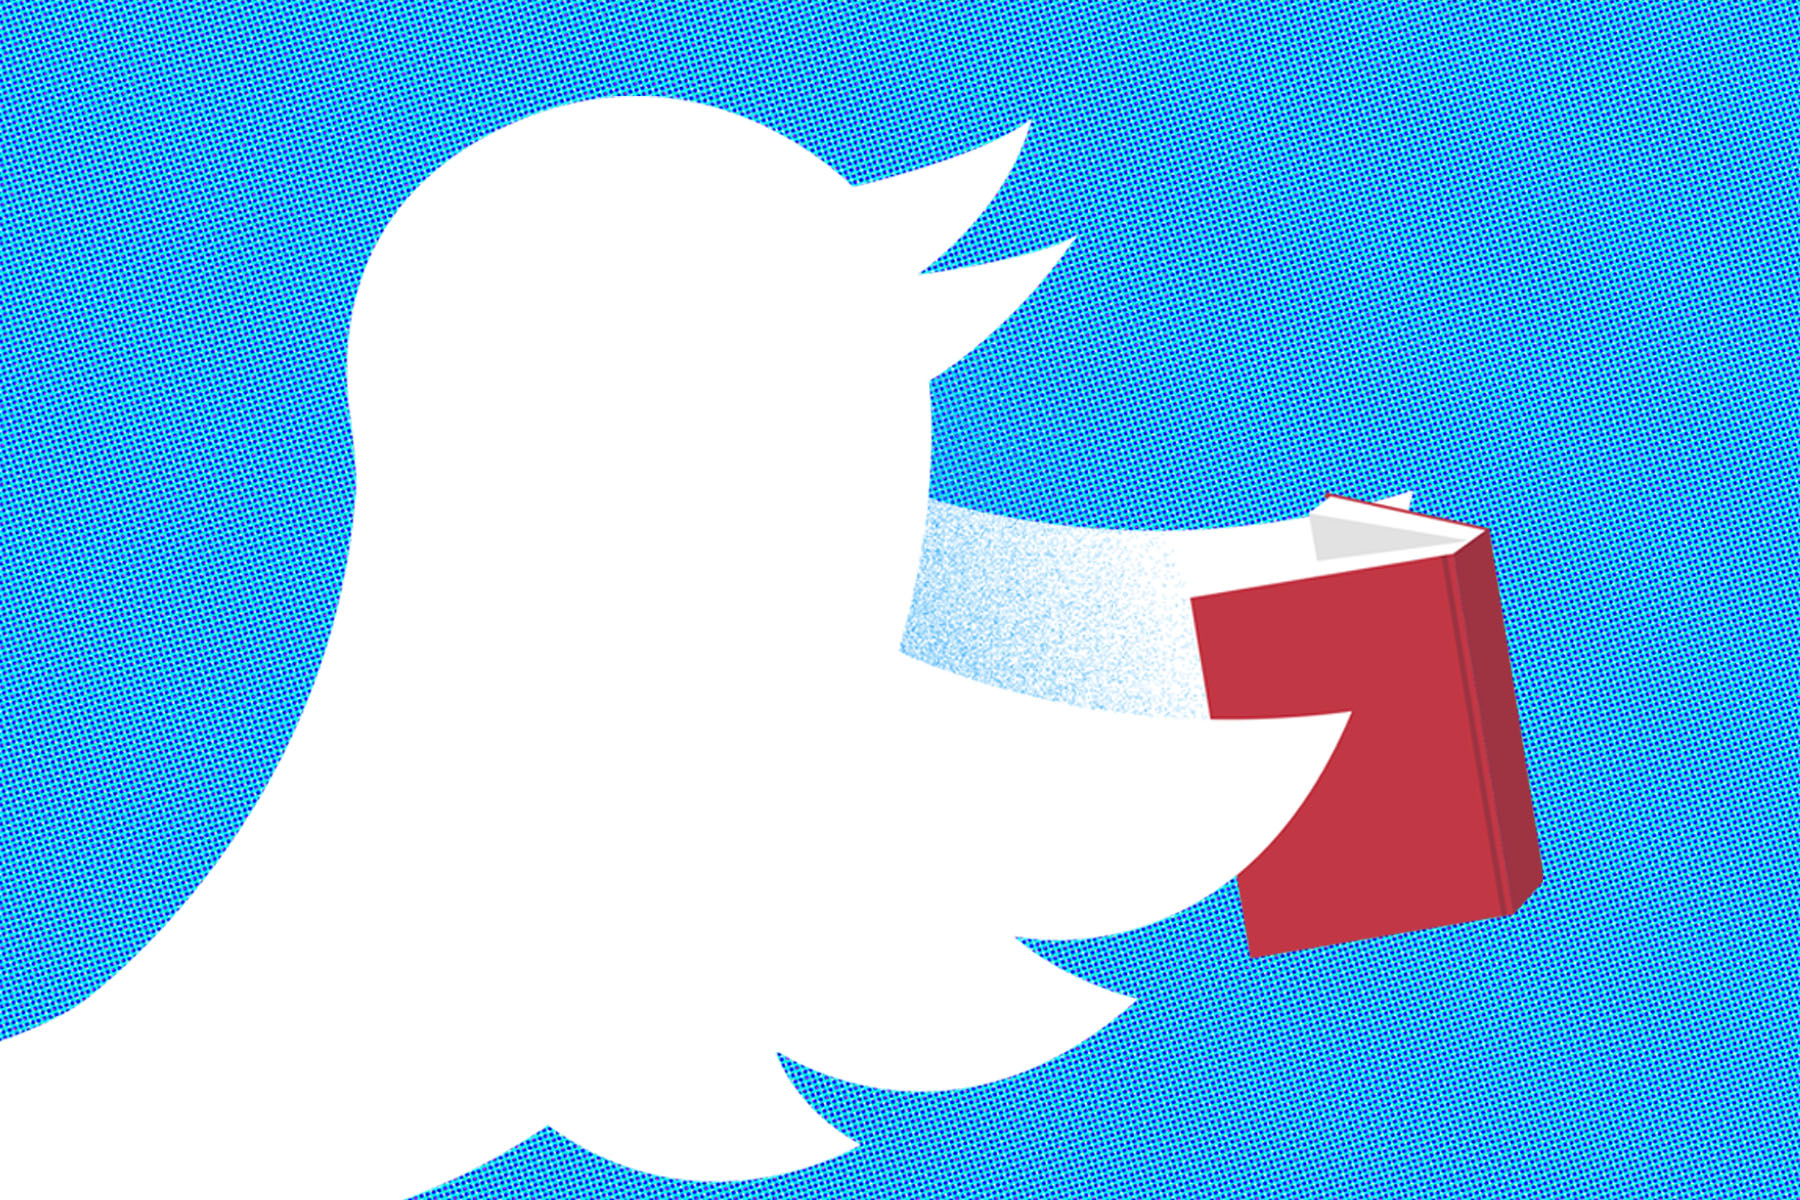 Image of bird from Twitter logo holding a red book, against a blue background.